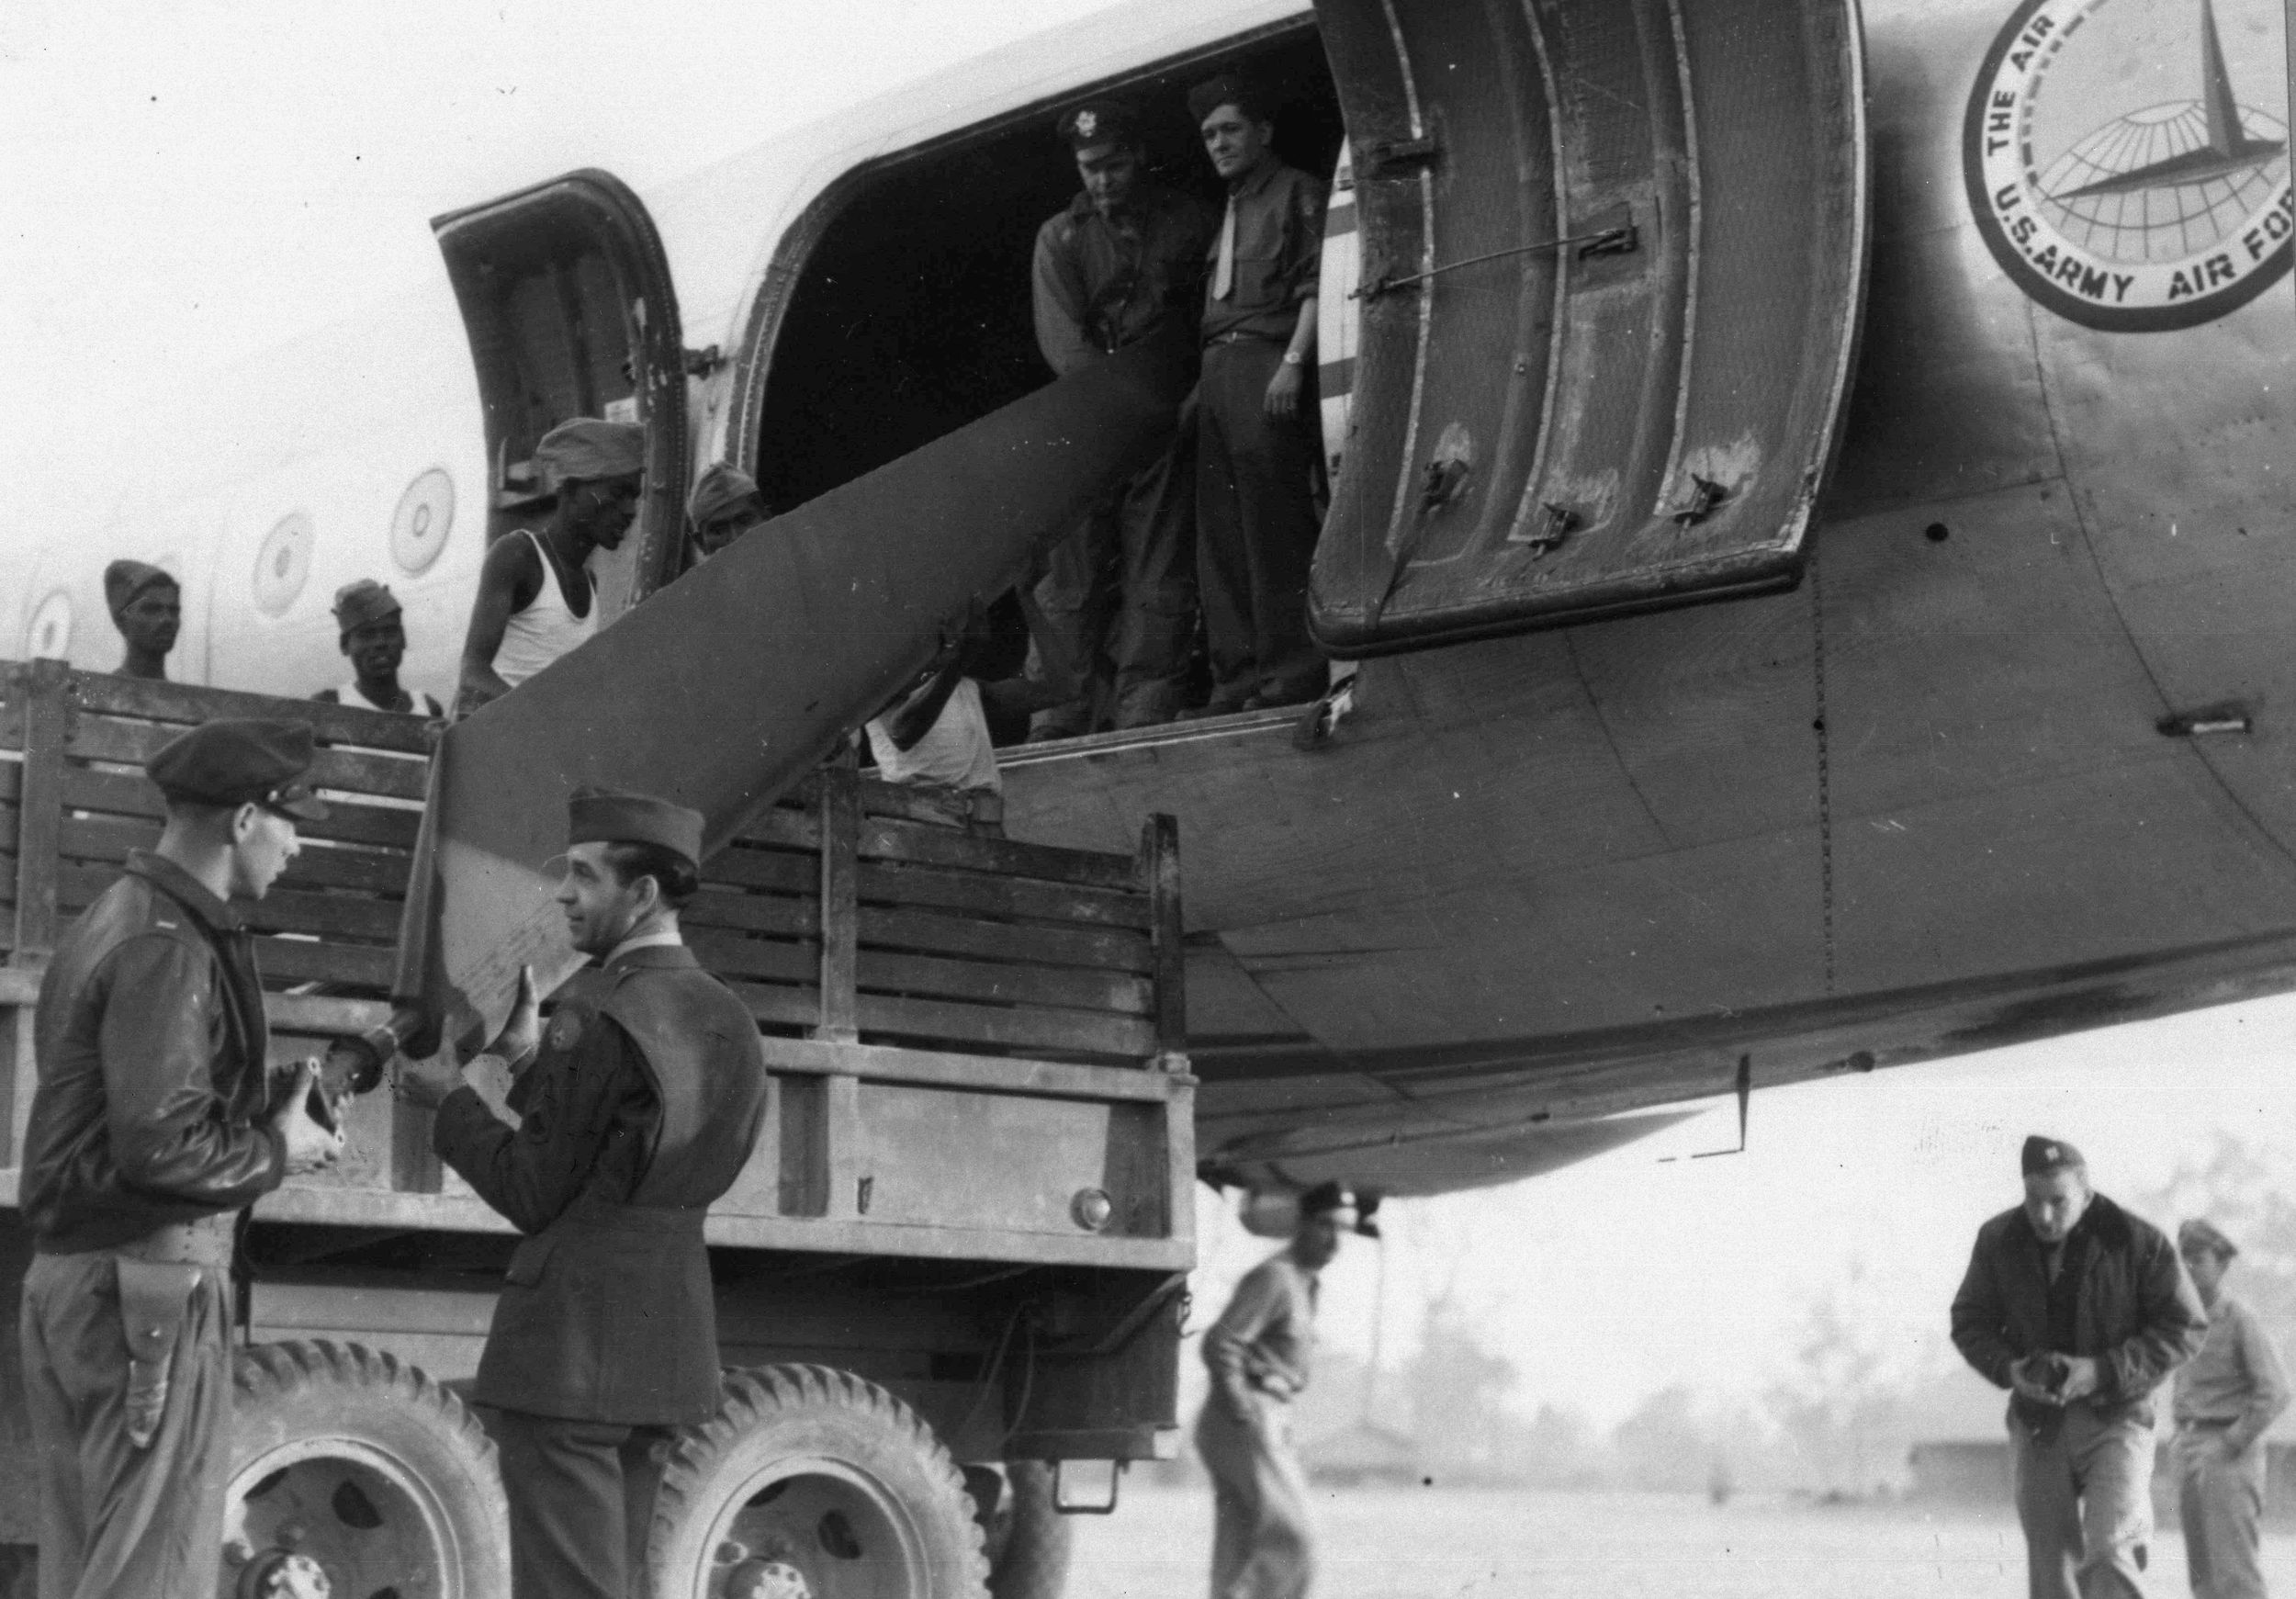 At Myitkyina, Burma, a helicopter is unloaded from a Douglas C-54 of the Air Transport Command. The helicopter saw limited use in the China-Burma-India Theater during World War II.